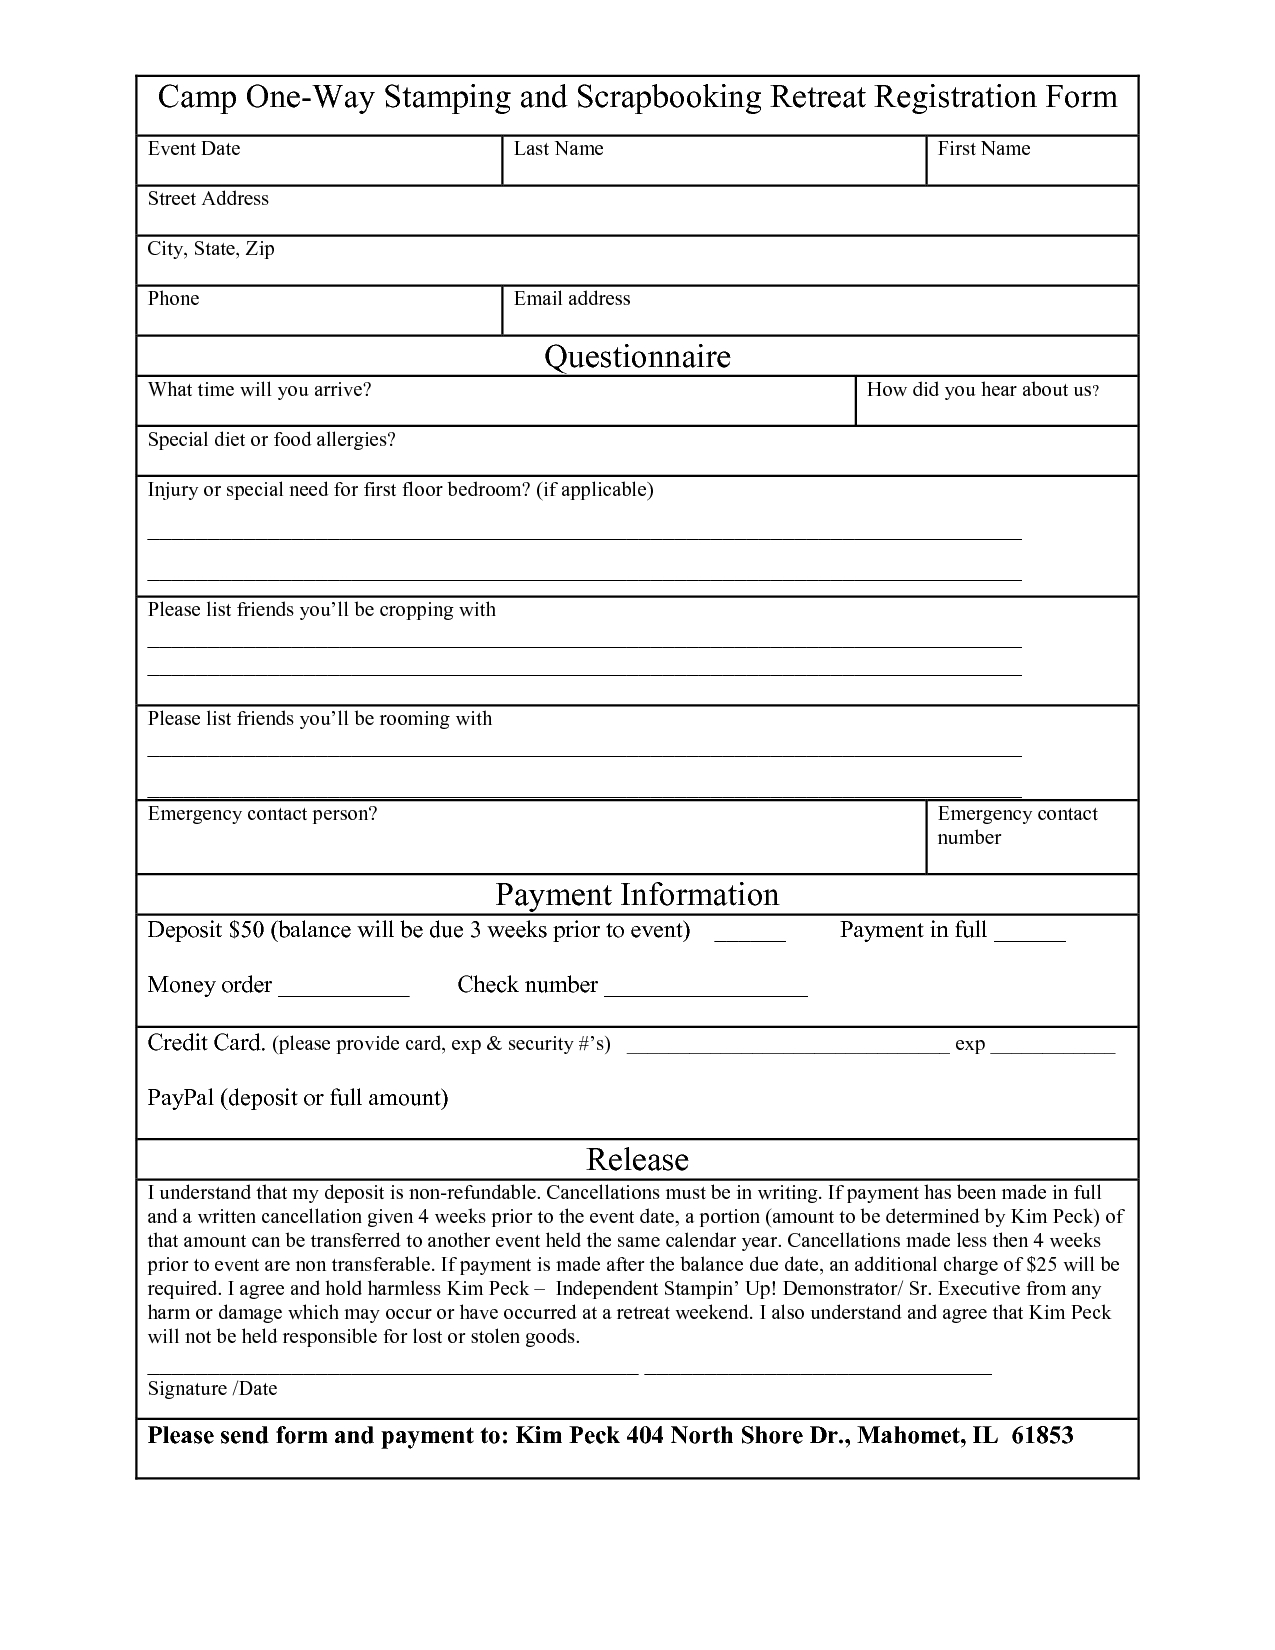 Free Registration Form Template Word Want A Free Refresher In Camp Registration Form Template Word